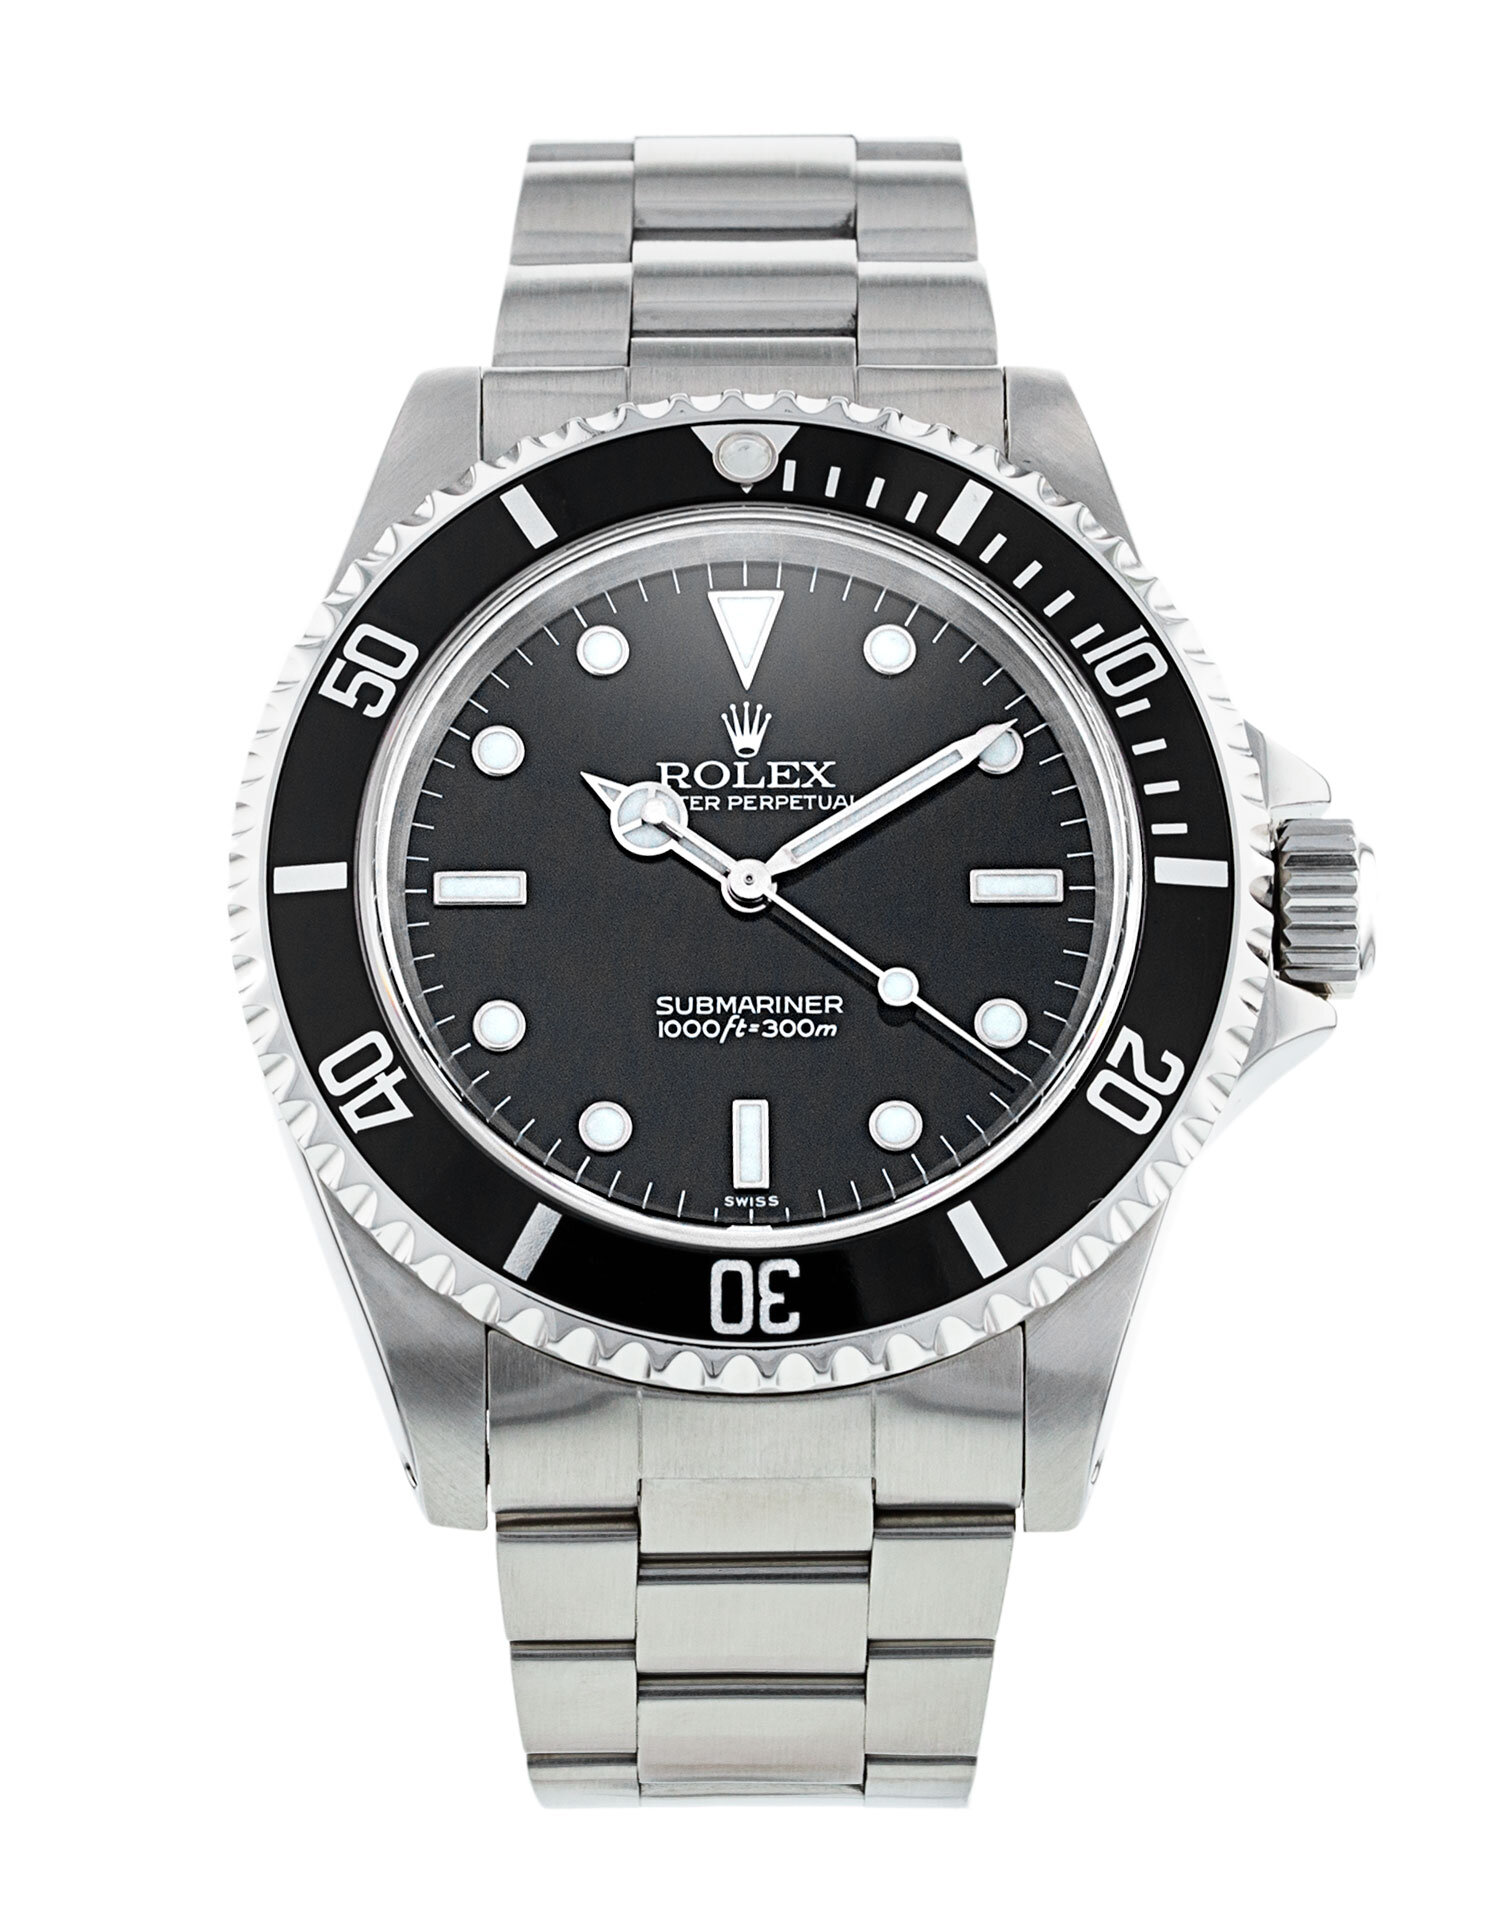 5 alternatives to the Rolex Submariner — Rescapement.